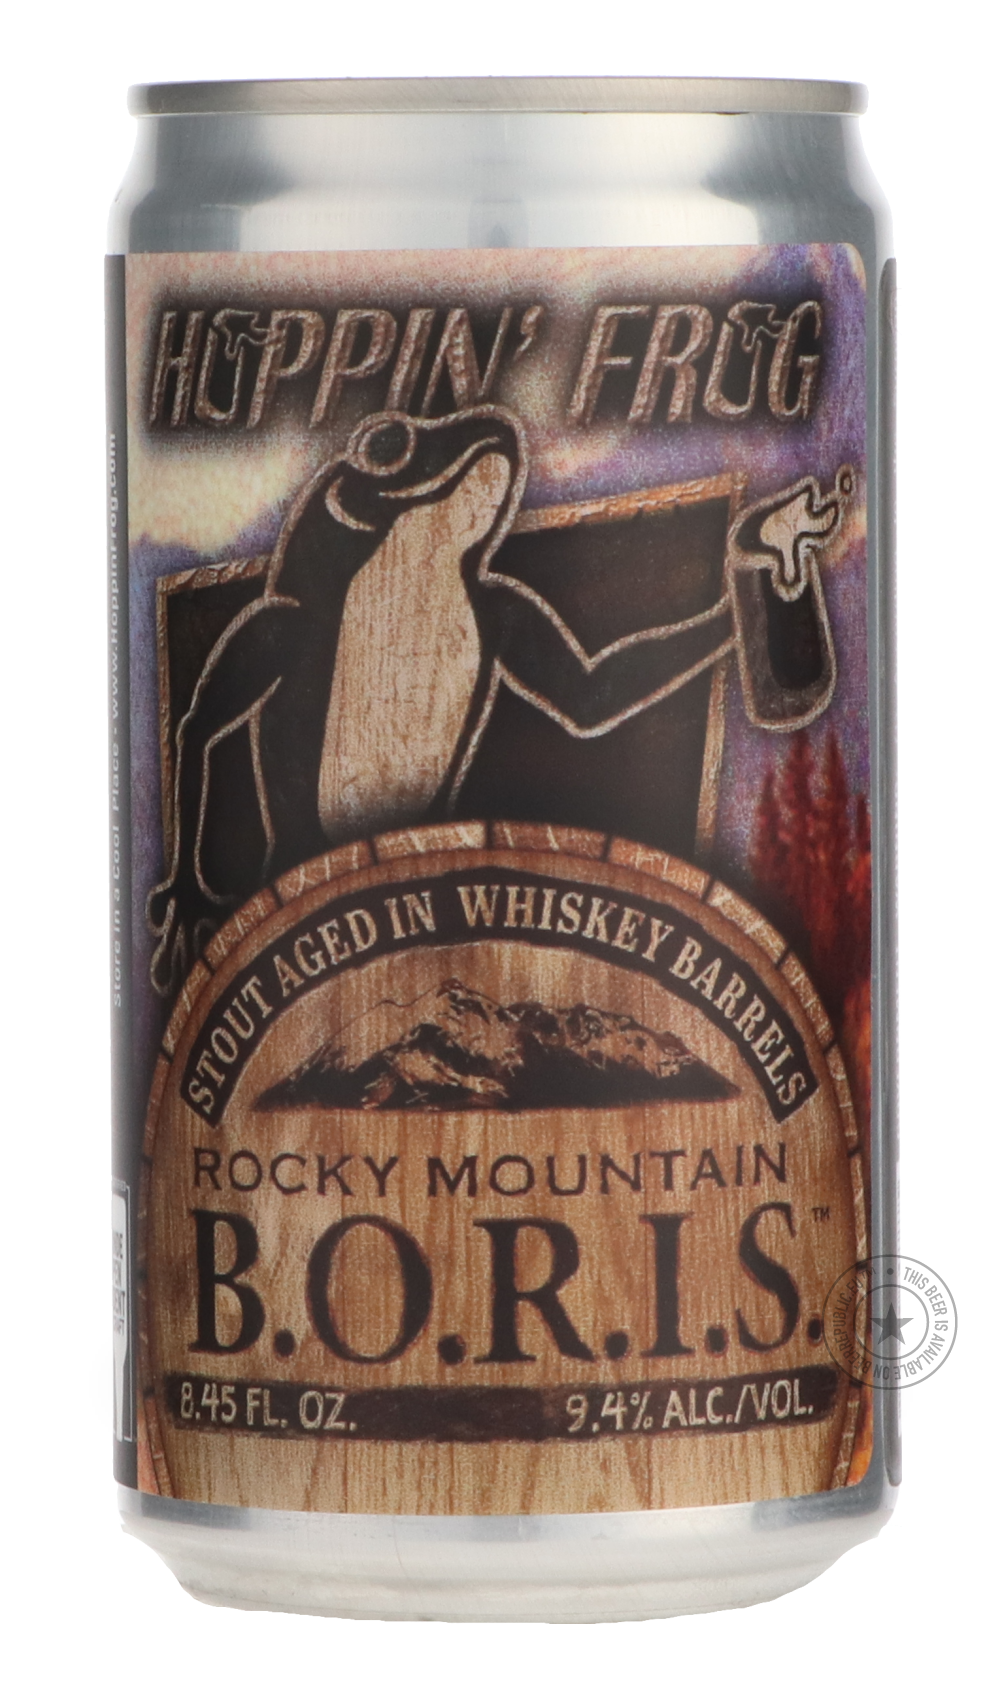 -Hoppin' Frog- Rocky Mountain Barrel Aged B.O.R.I.S.-Stout & Porter- Only @ Beer Republic - The best online beer store for American & Canadian craft beer - Buy beer online from the USA and Canada - Bier online kopen - Amerikaans bier kopen - Craft beer store - Craft beer kopen - Amerikanisch bier kaufen - Bier online kaufen - Acheter biere online - IPA - Stout - Porter - New England IPA - Hazy IPA - Imperial Stout - Barrel Aged - Barrel Aged Imperial Stout - Brown - Dark beer - Blond - Blonde - Pilsner - La